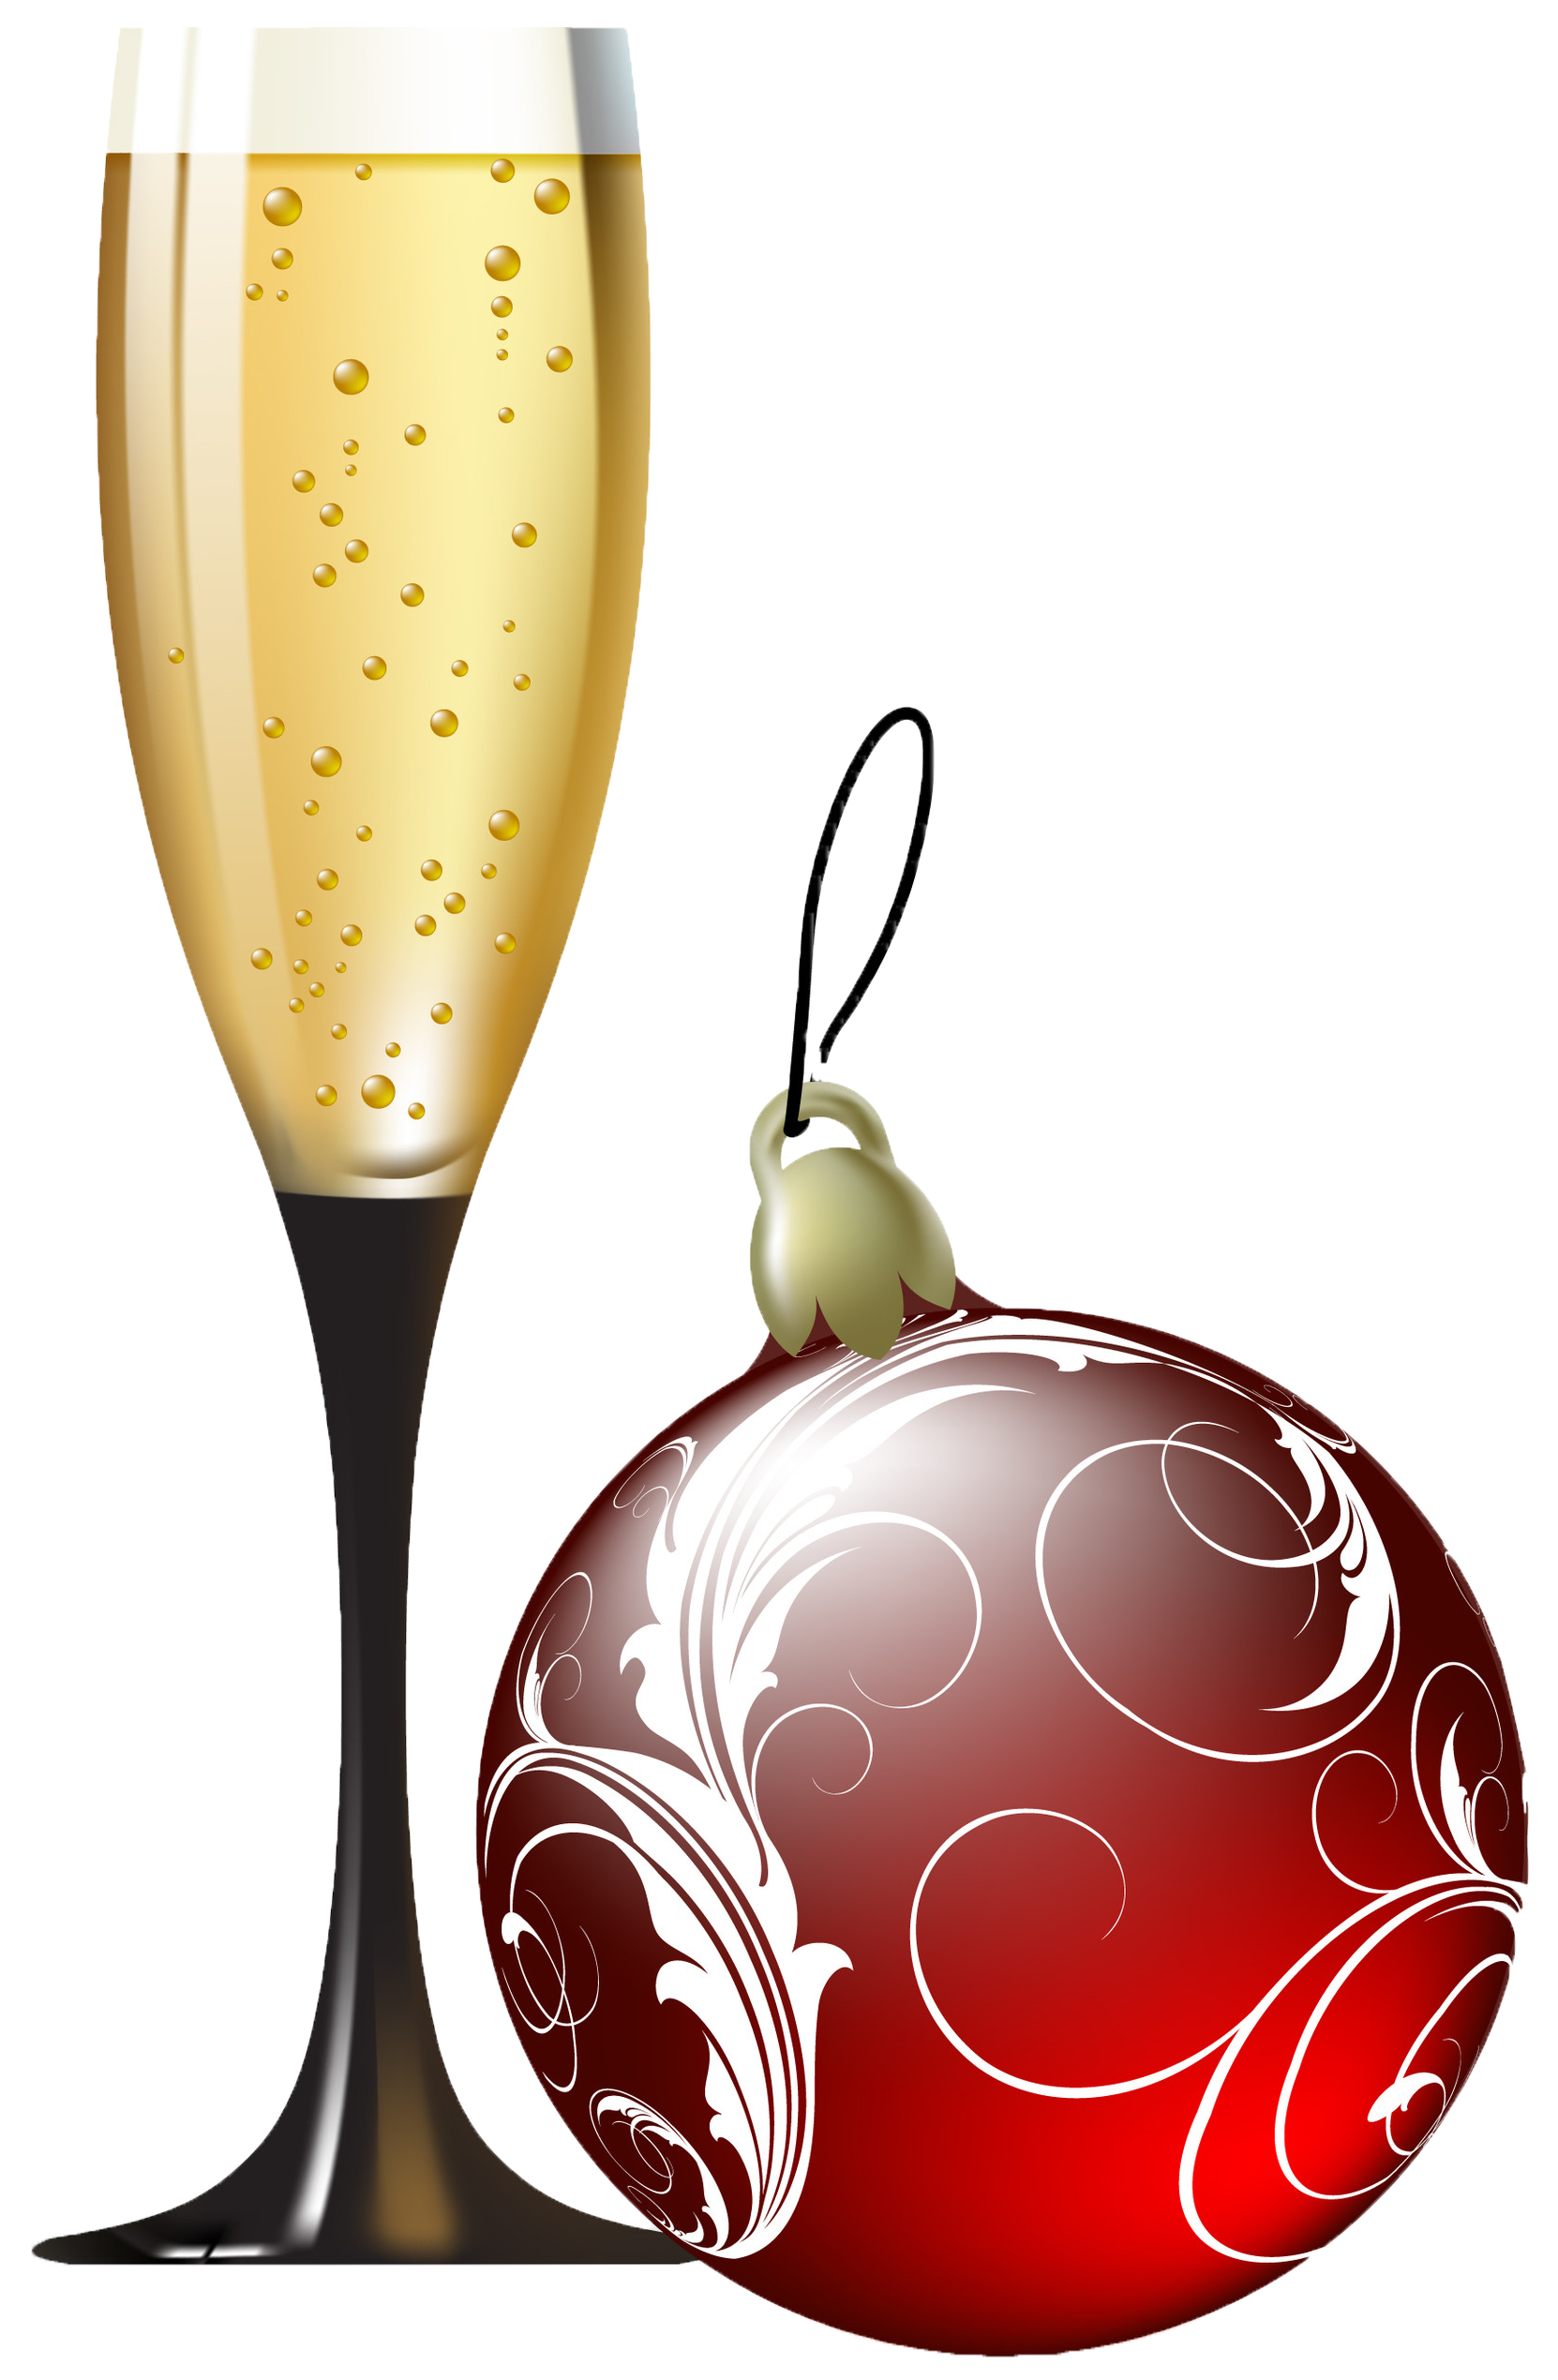 champaign clipart holiday wine